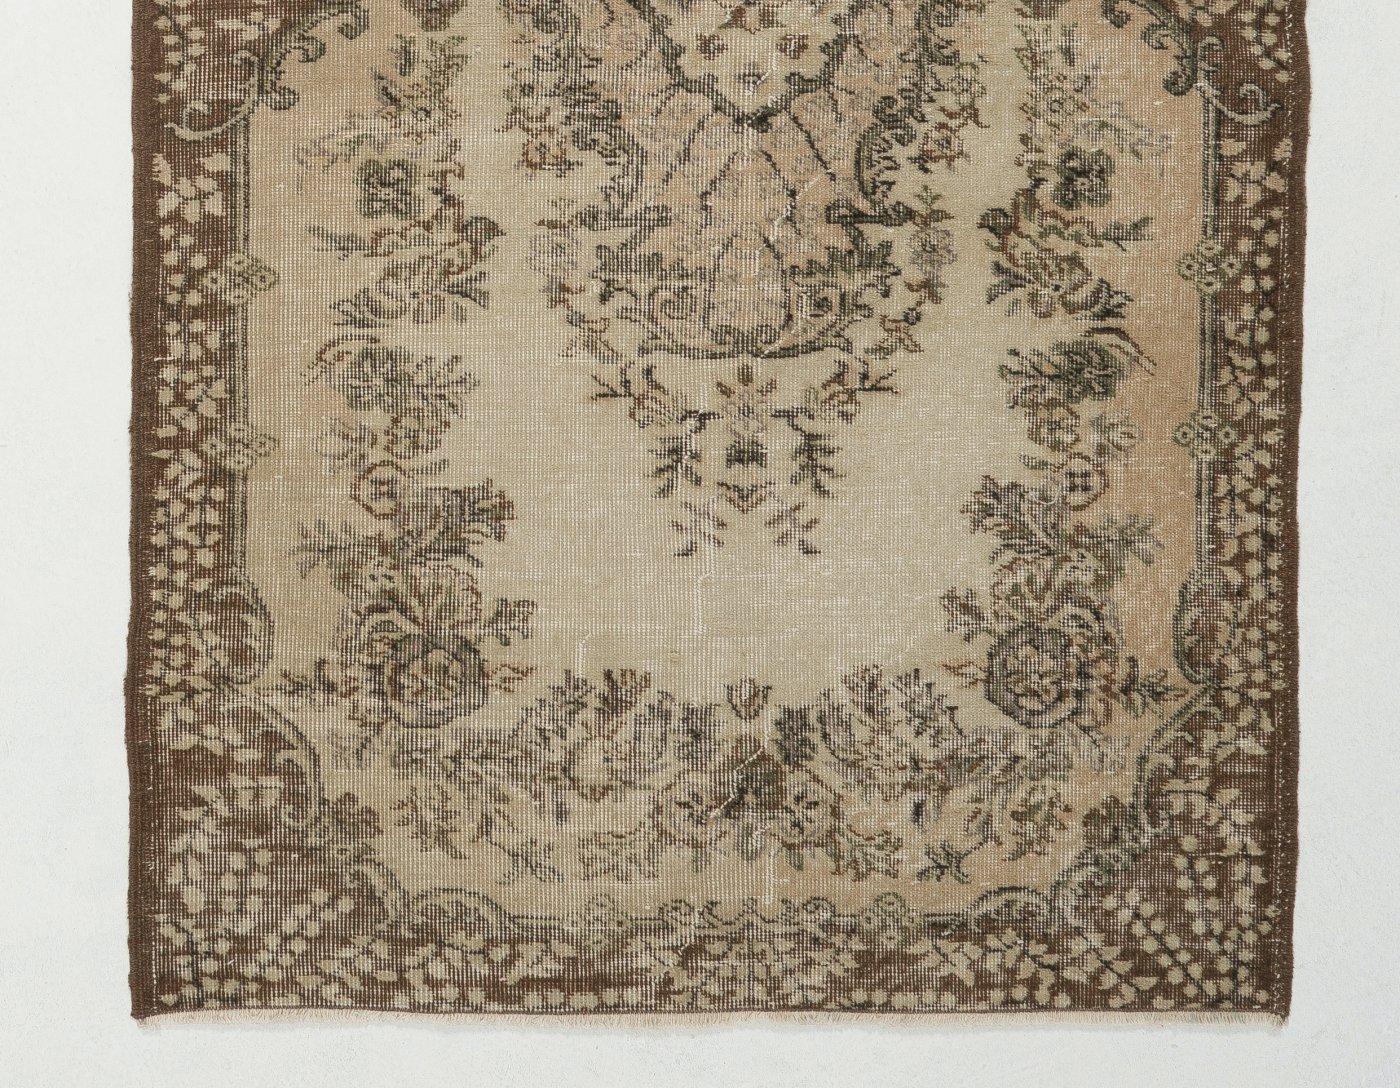 Oushak 4x7 Ft Handmade Vintage Turkish Accent Rug in Beige & Brown. Faded Wool Carpet For Sale